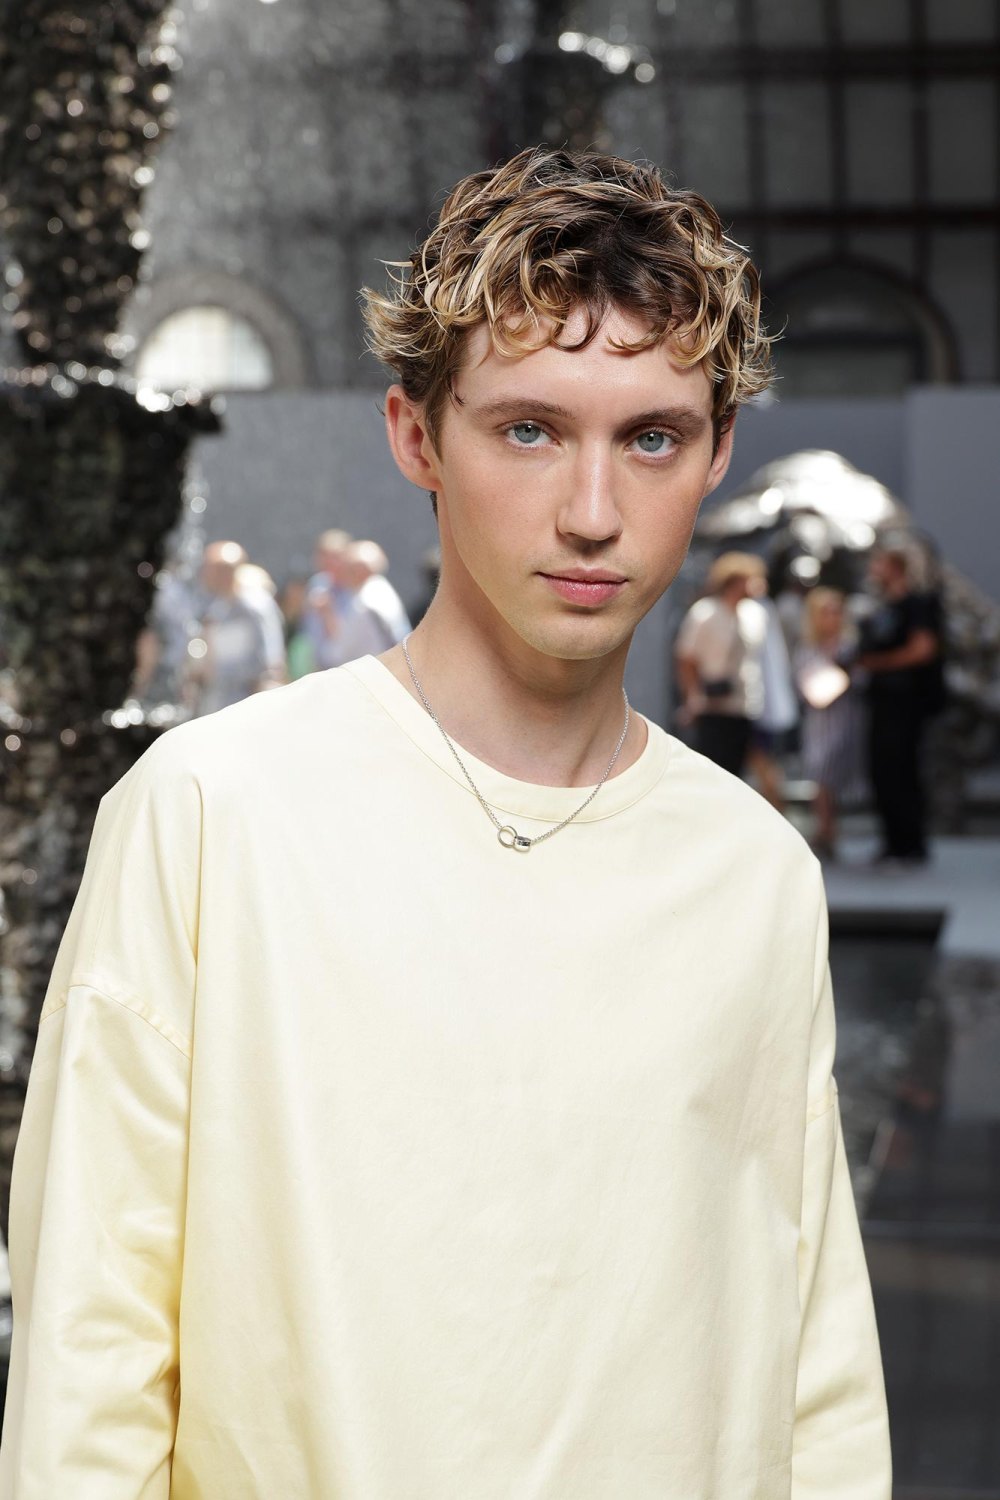 Troye Sivan Compares Timothee Chalamets SNL Impression of Him to A Weird Fking Dream